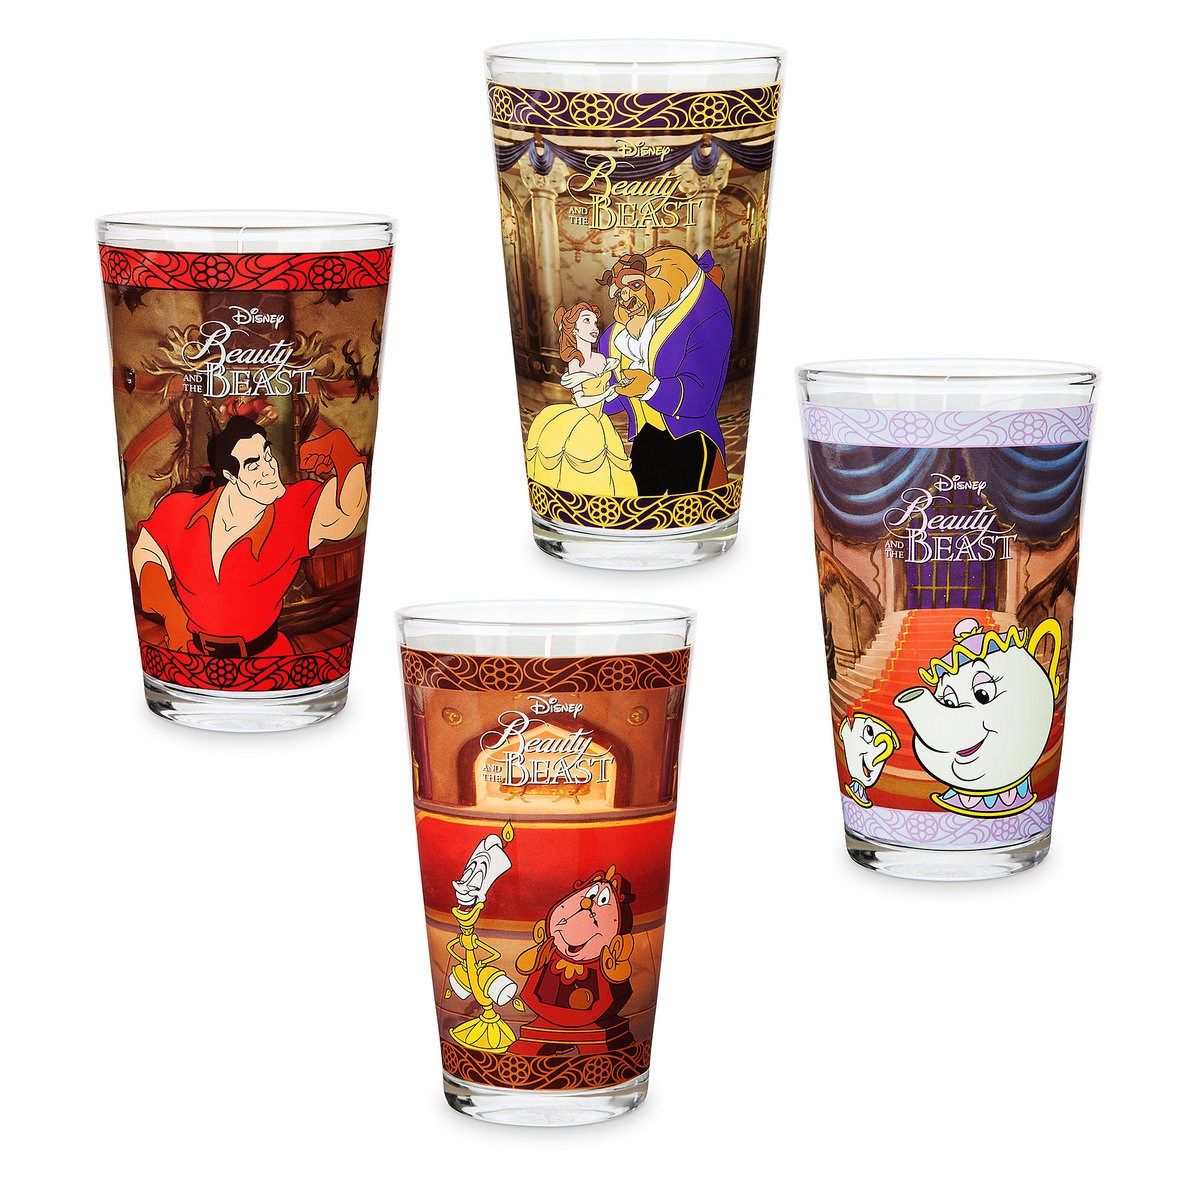 Beauty and the Beast cups